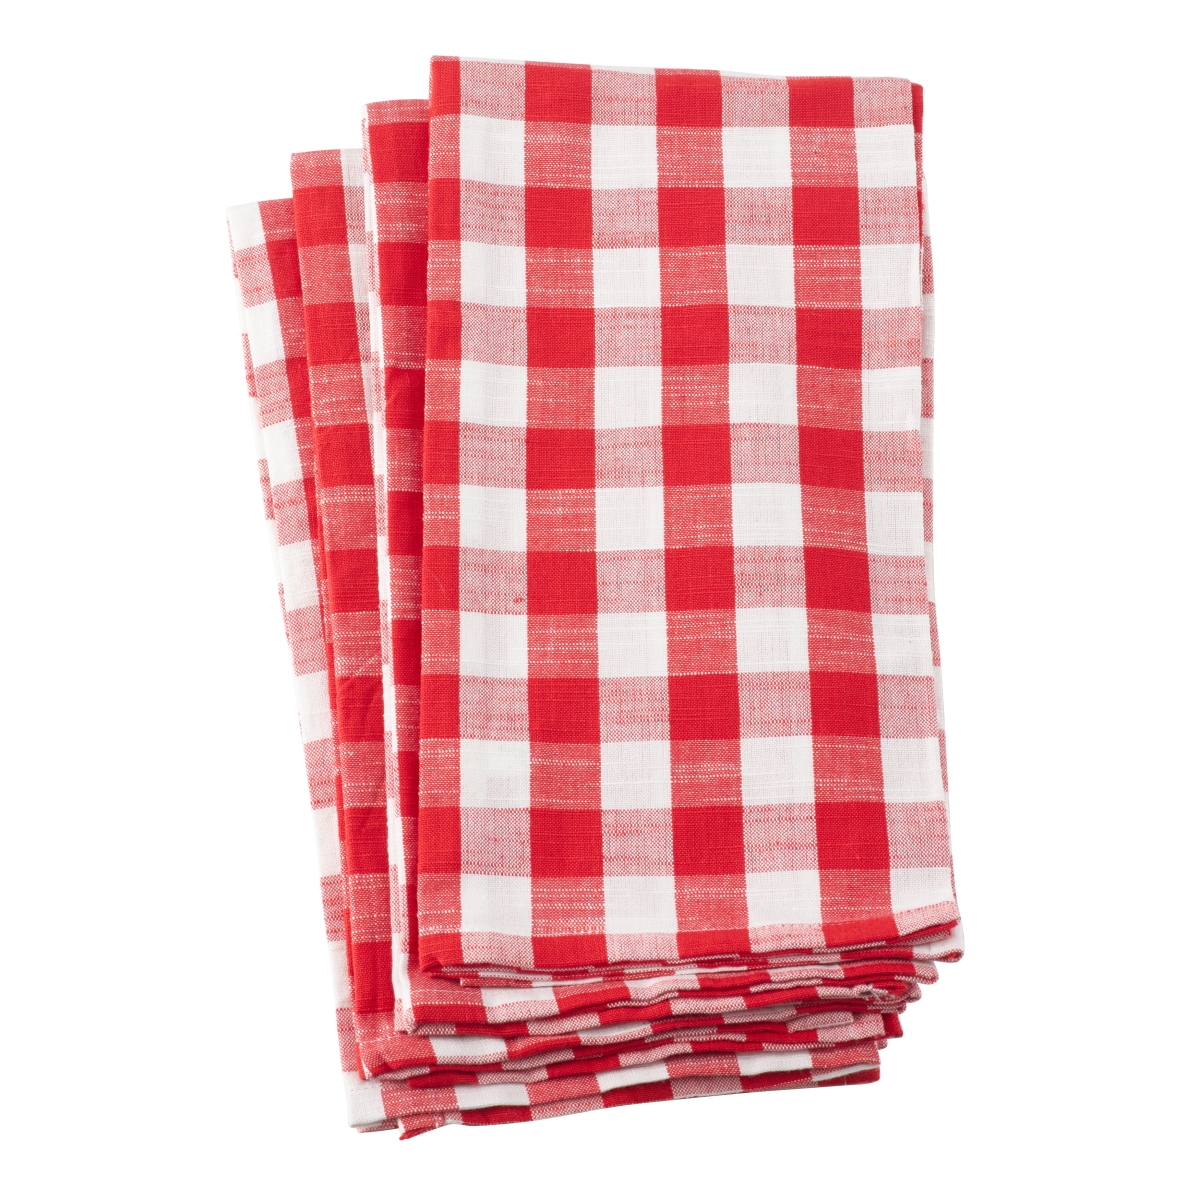 1029.r2028 20 X 28 In. Gingham Plaid Check Design Cotton Kitchen Towel, Red - Set Of 4